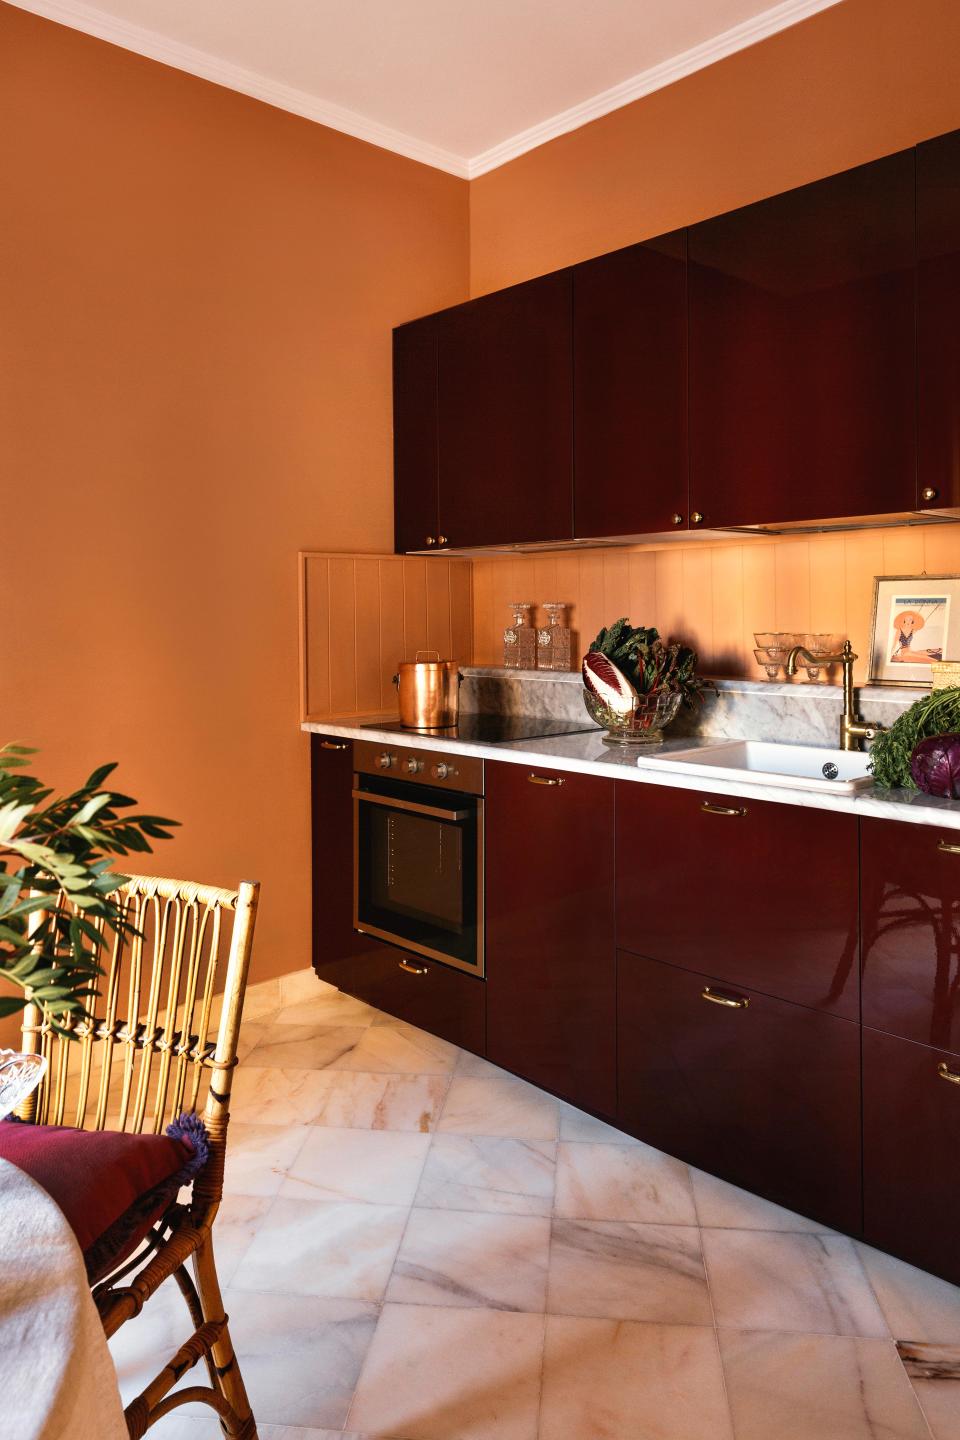 Mirta shifted the kitchen to achieve an open-plan layout and opted for a contrasting look of glossy burgundy millwork and terra-cotta-colored walls. She also added wooden paneling, a Carrara marble top, and brass details, although according to her, it’s the framed vintage Vogue covers occupying the shelf that are the real stars. “They’re what served as the lodestar for the renovation,” she muses. The cushion on the chair is from Mirta’s homeware collection. A tablecloth from Zara Home acts as a calming antidote to the surrounding color.